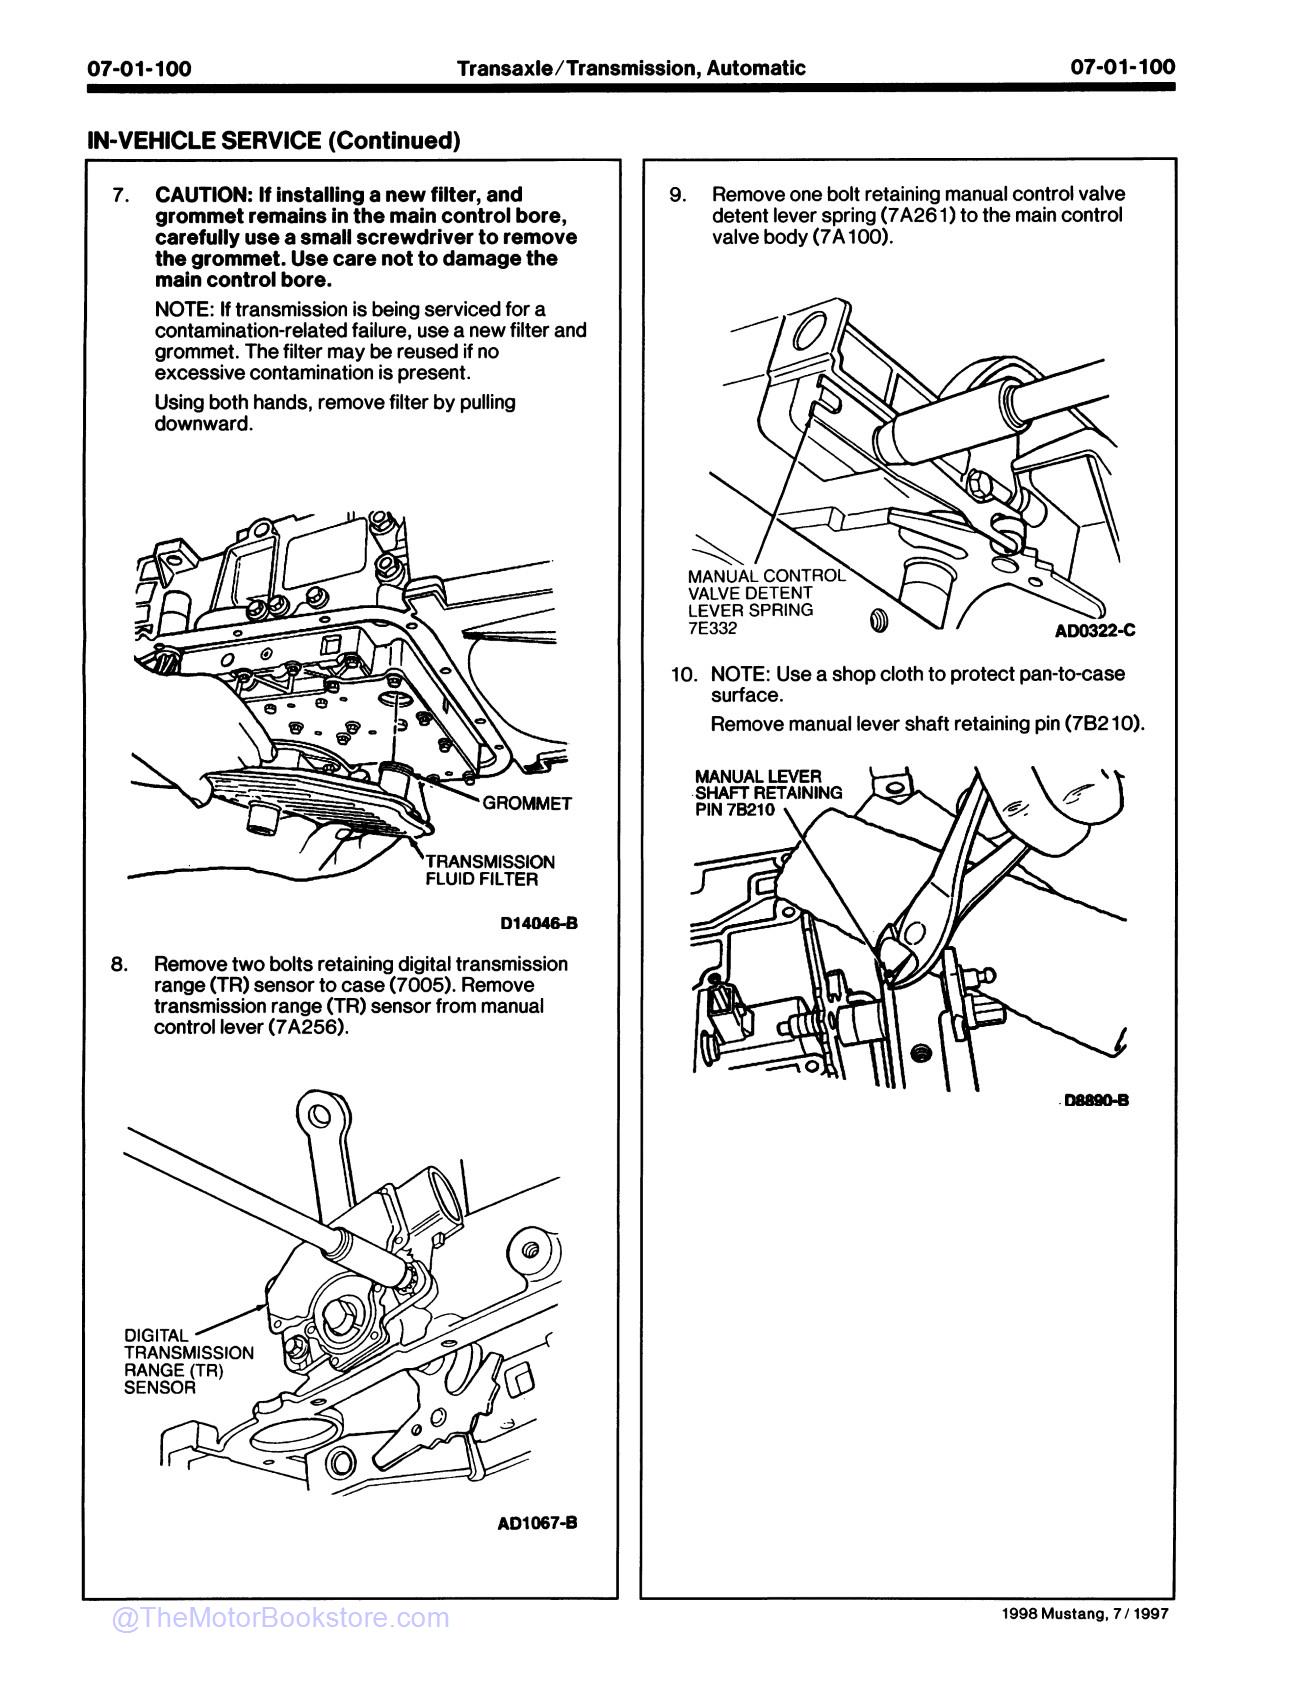 1998 Ford Mustang Service Manual - Sample Page 2